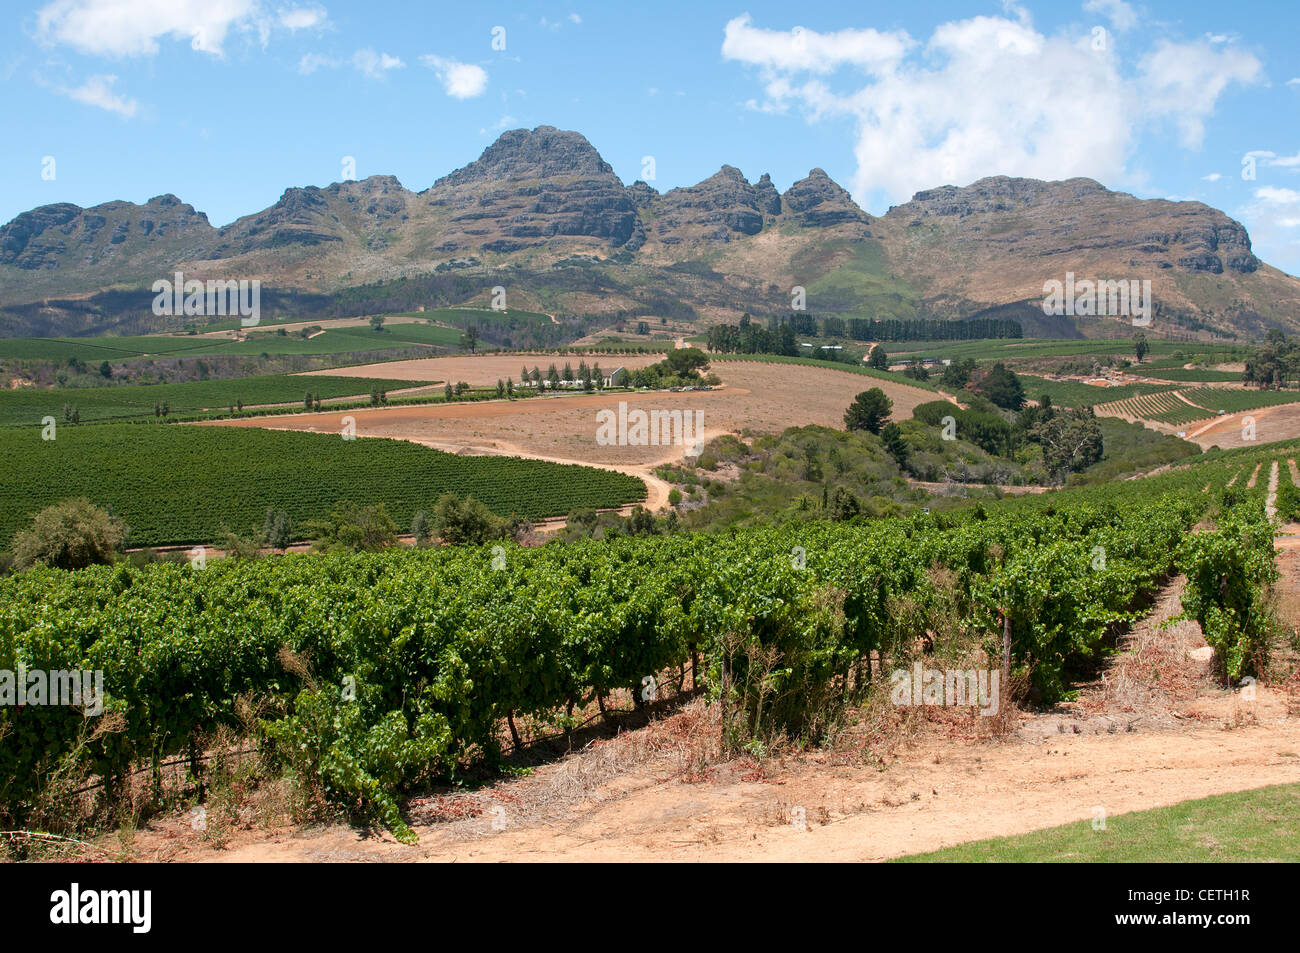 Helderberg Mountain and vines at Guardian Peak winery Stellenbosch South Africa Stock Photo